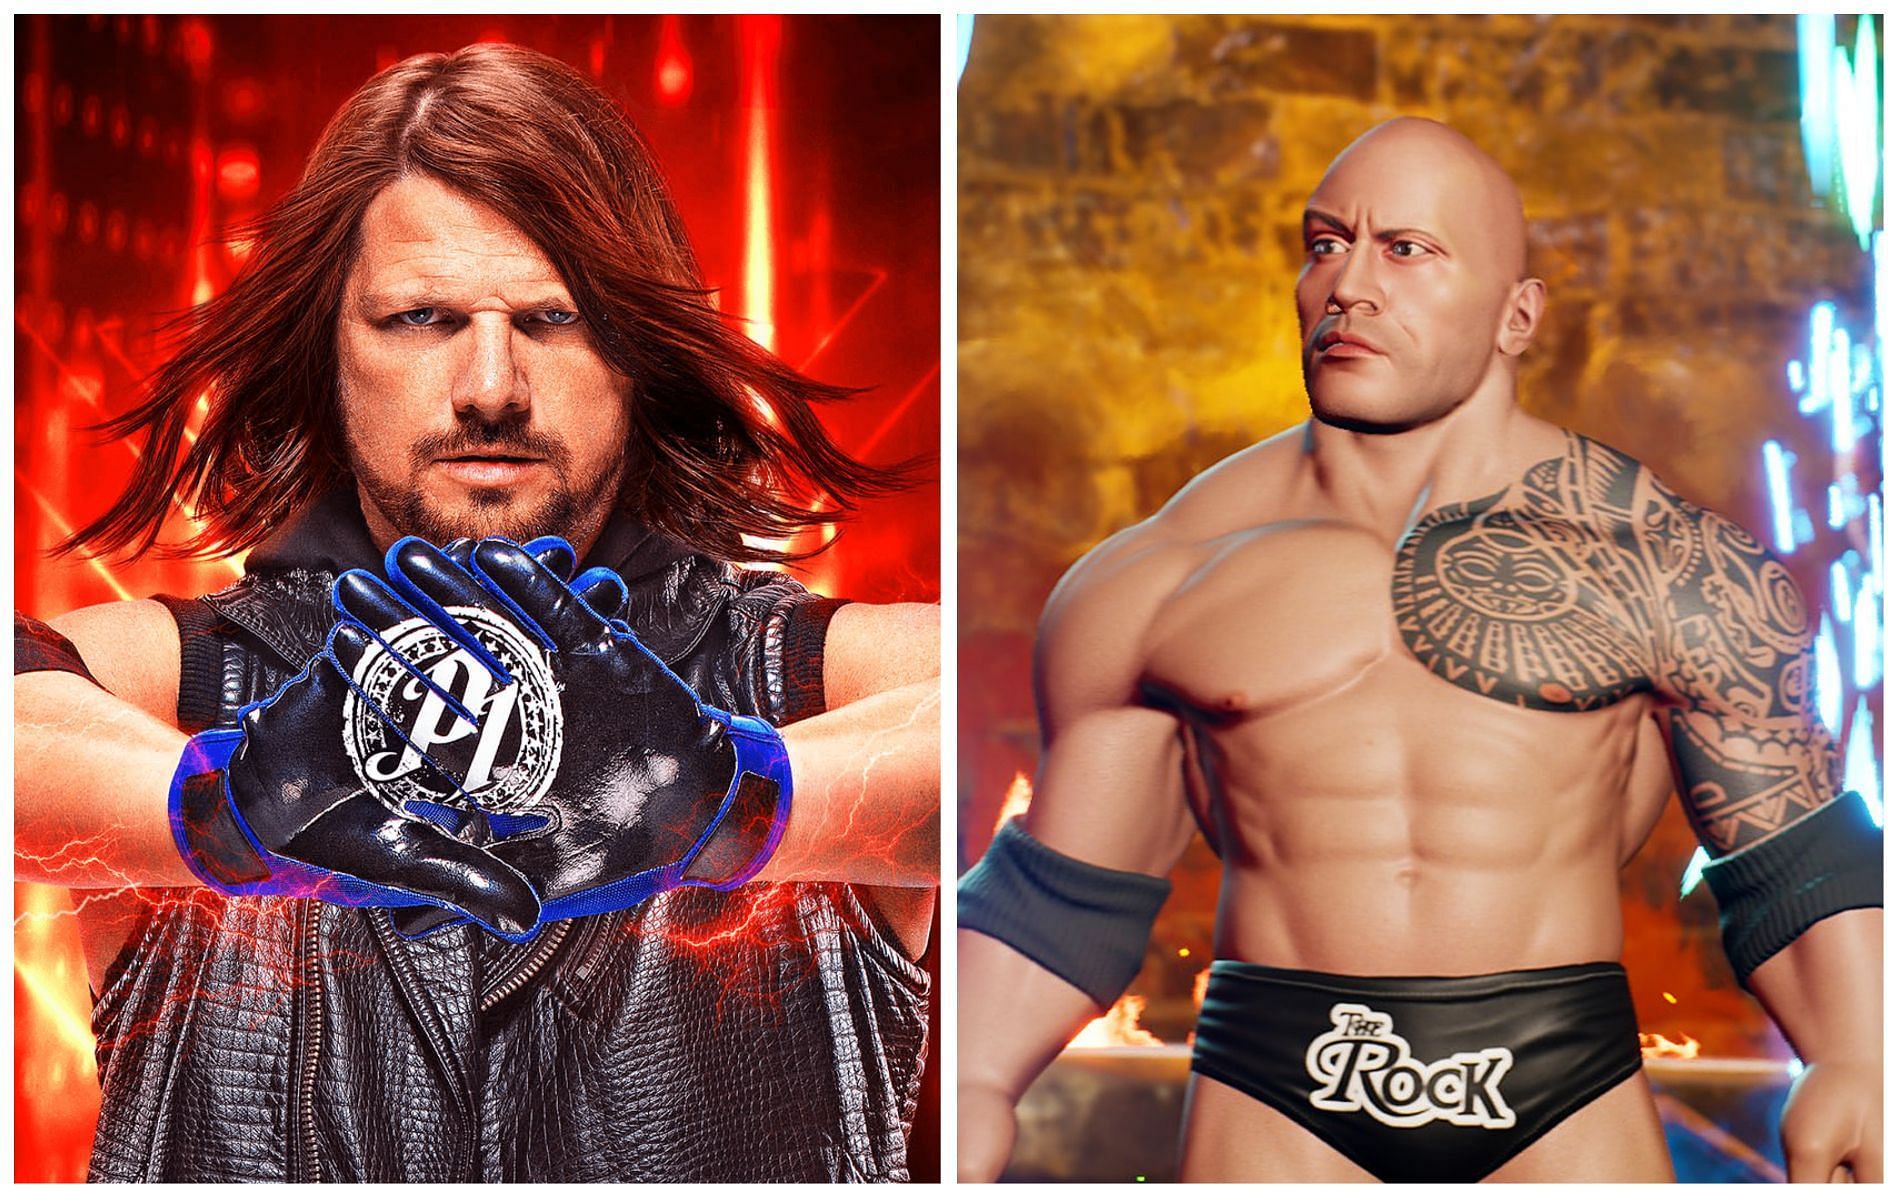 Pro-wrestling fans can get their fix of high-octane action from many video games (Images via 2K Sports)